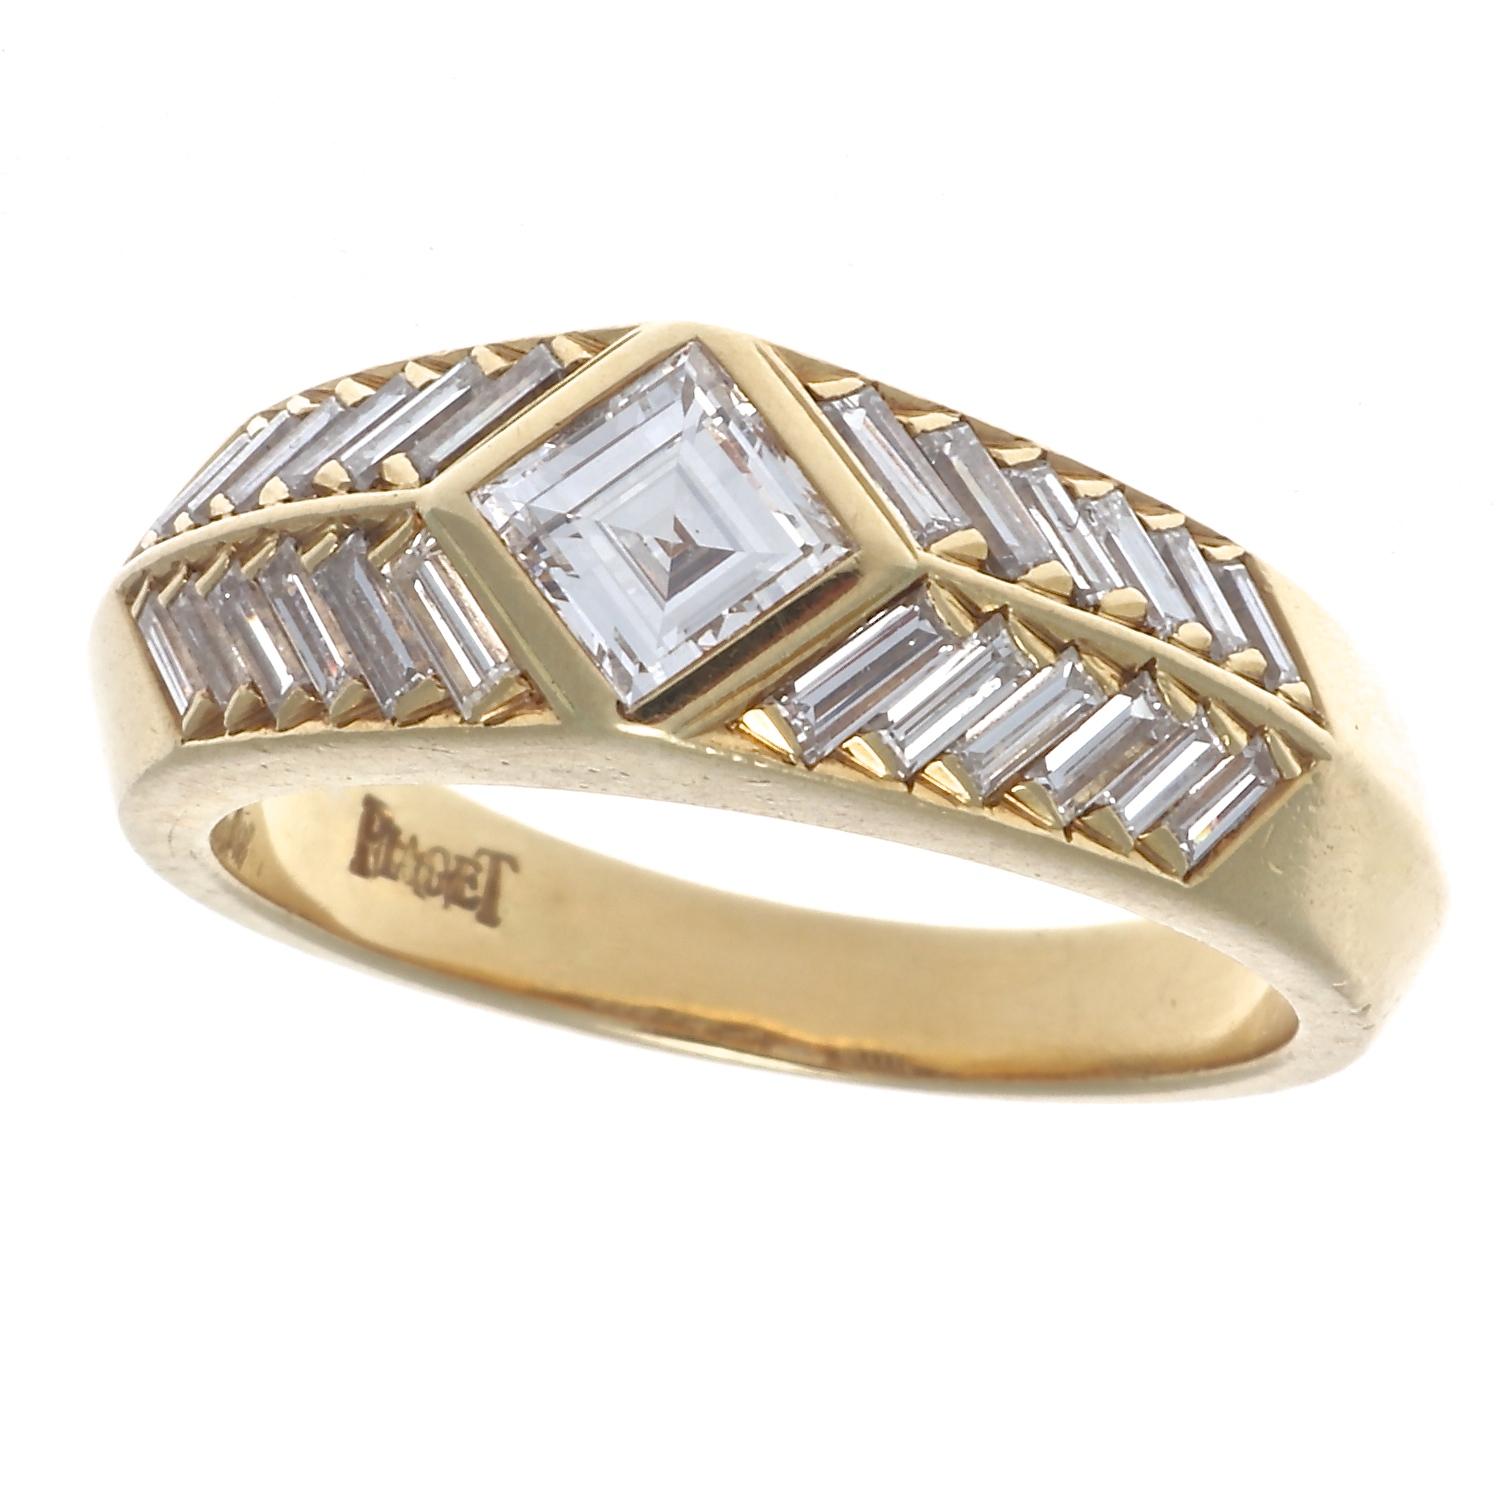 A rich history of futuristic designs has kept Piaget interesting and relevant . Featuring a single sideways set emerald cut diamond abstractly accented by pyramids of numerous baguette cut diamonds. Crafted in 18k yellow gold. Signed Piaget. Ring